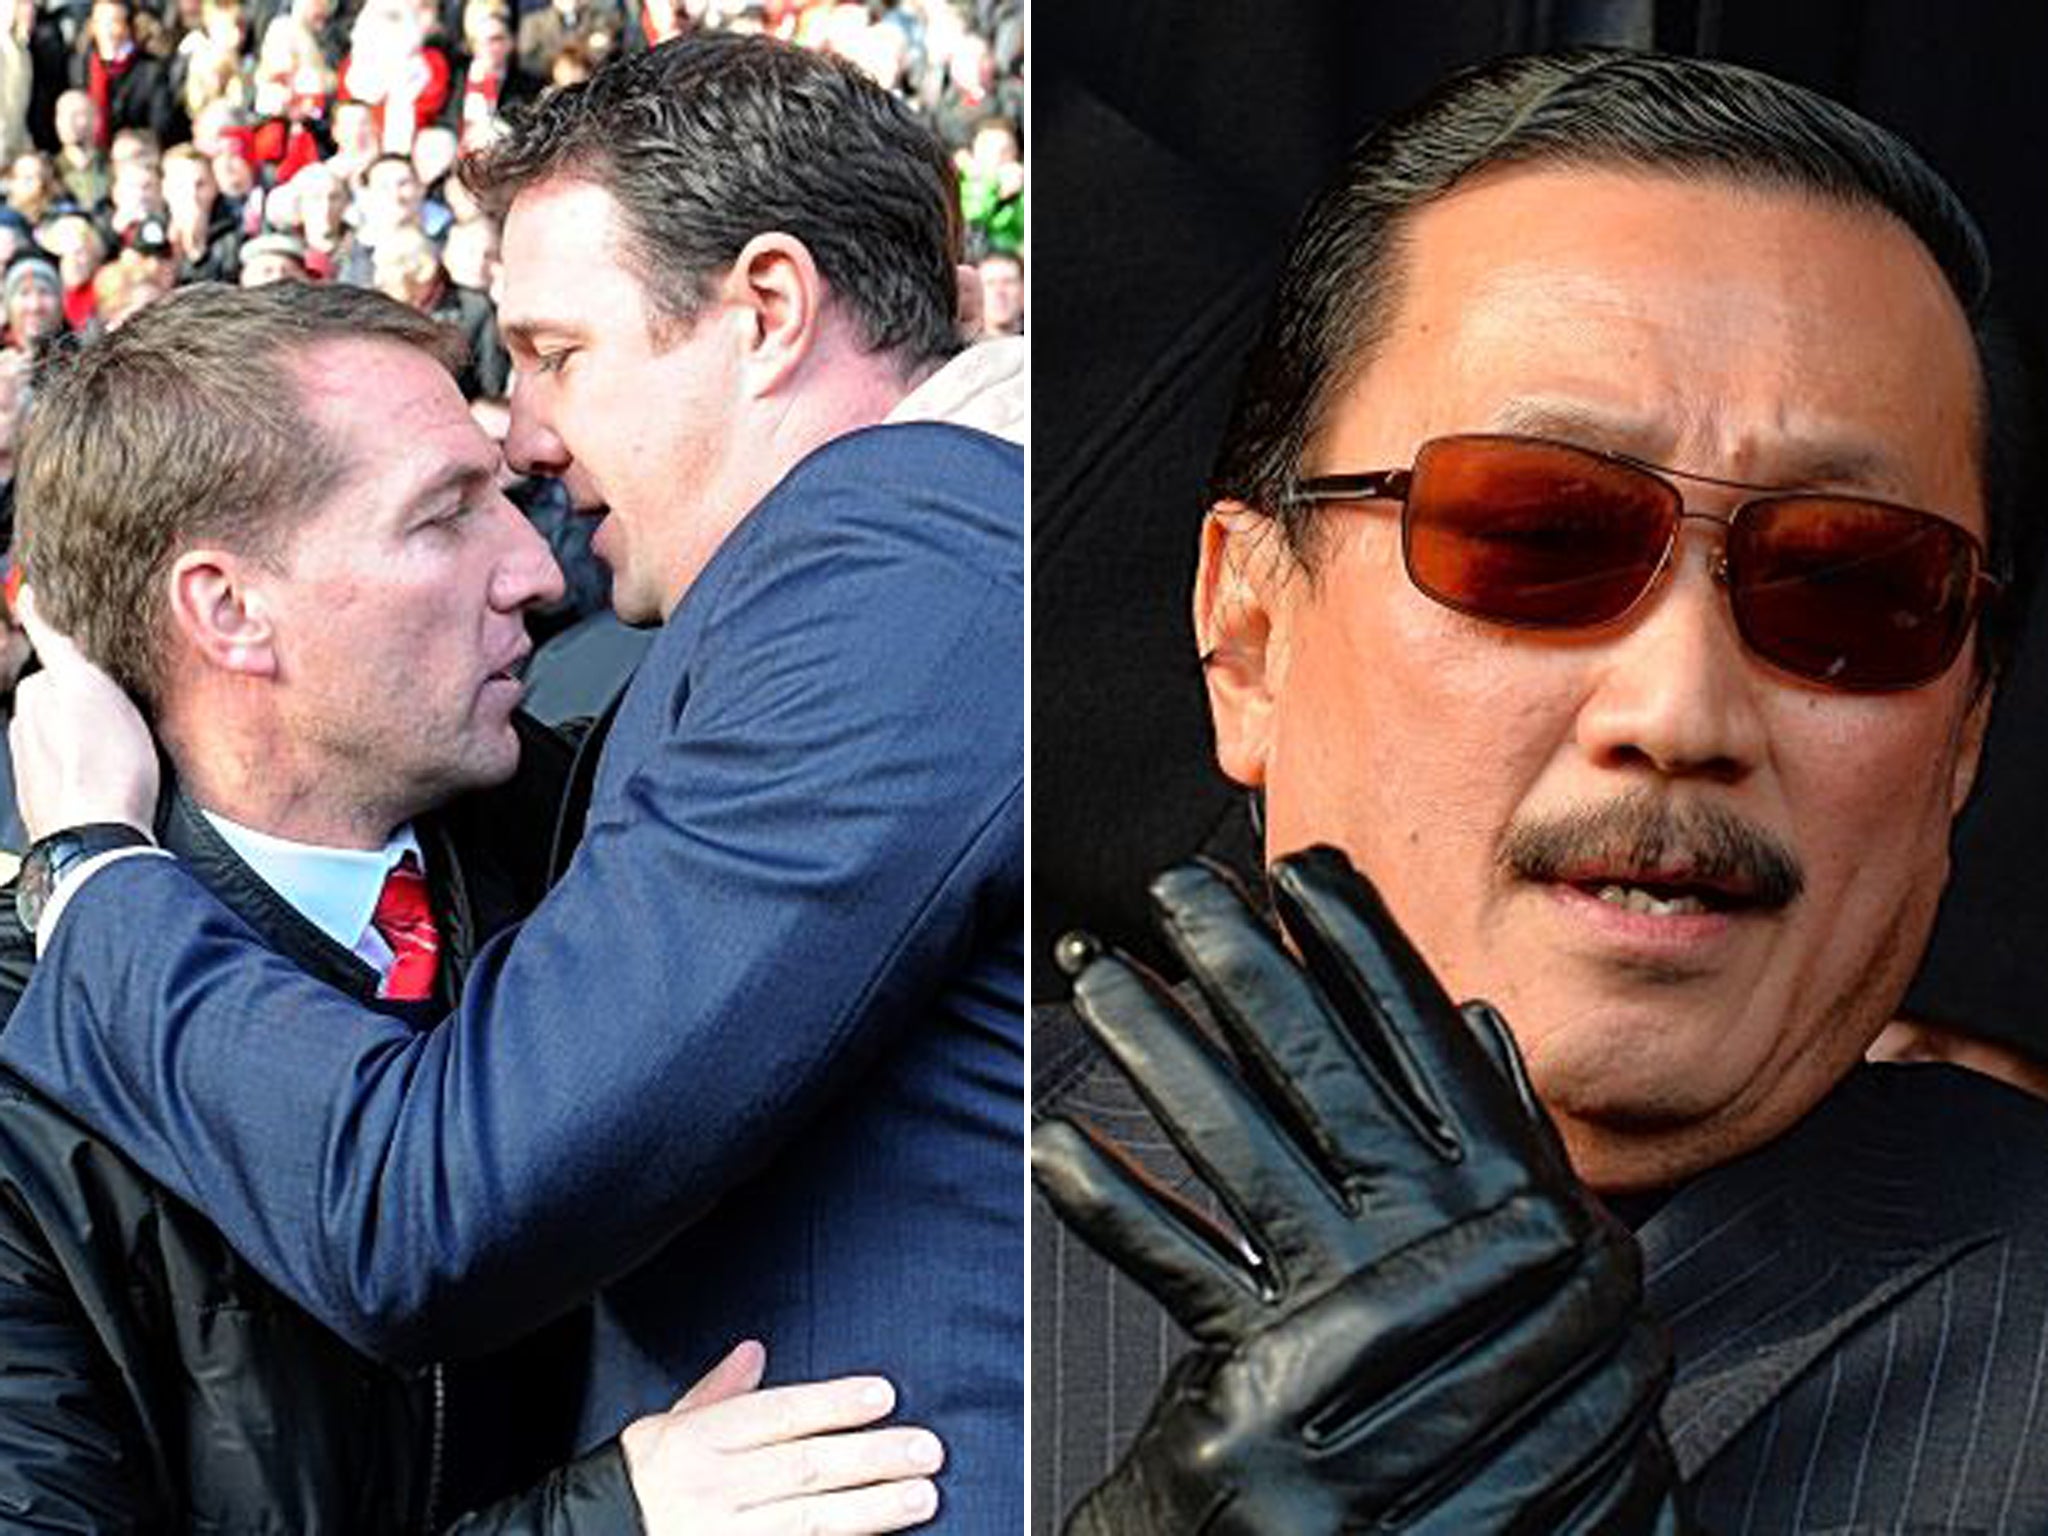 Brendan Rodgers has given his support to Malky Mackay as he faces the sack from Cardiff City owner Vincent Tan